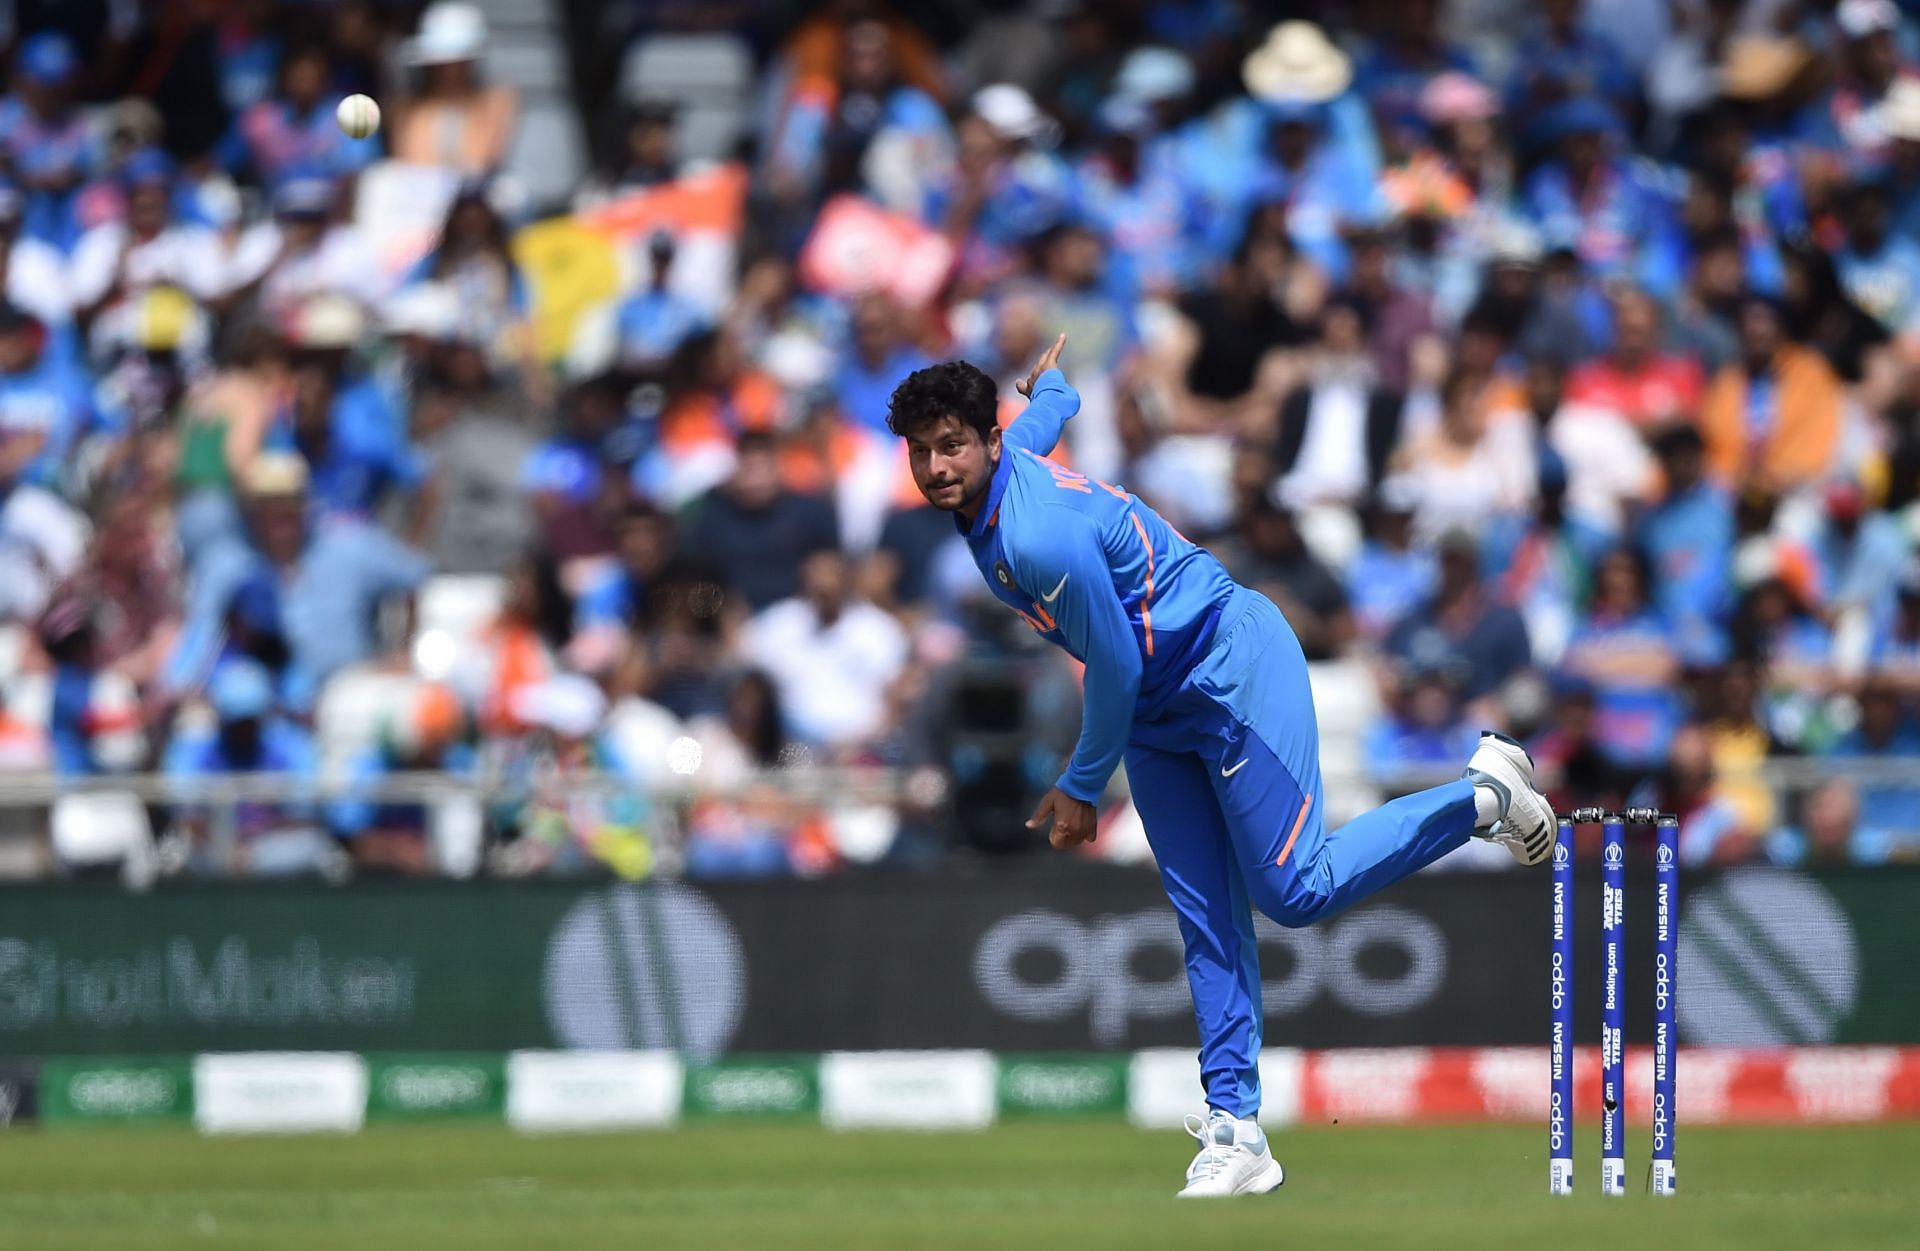 Kuldeep Yadav in action during the 2019 World Cup.